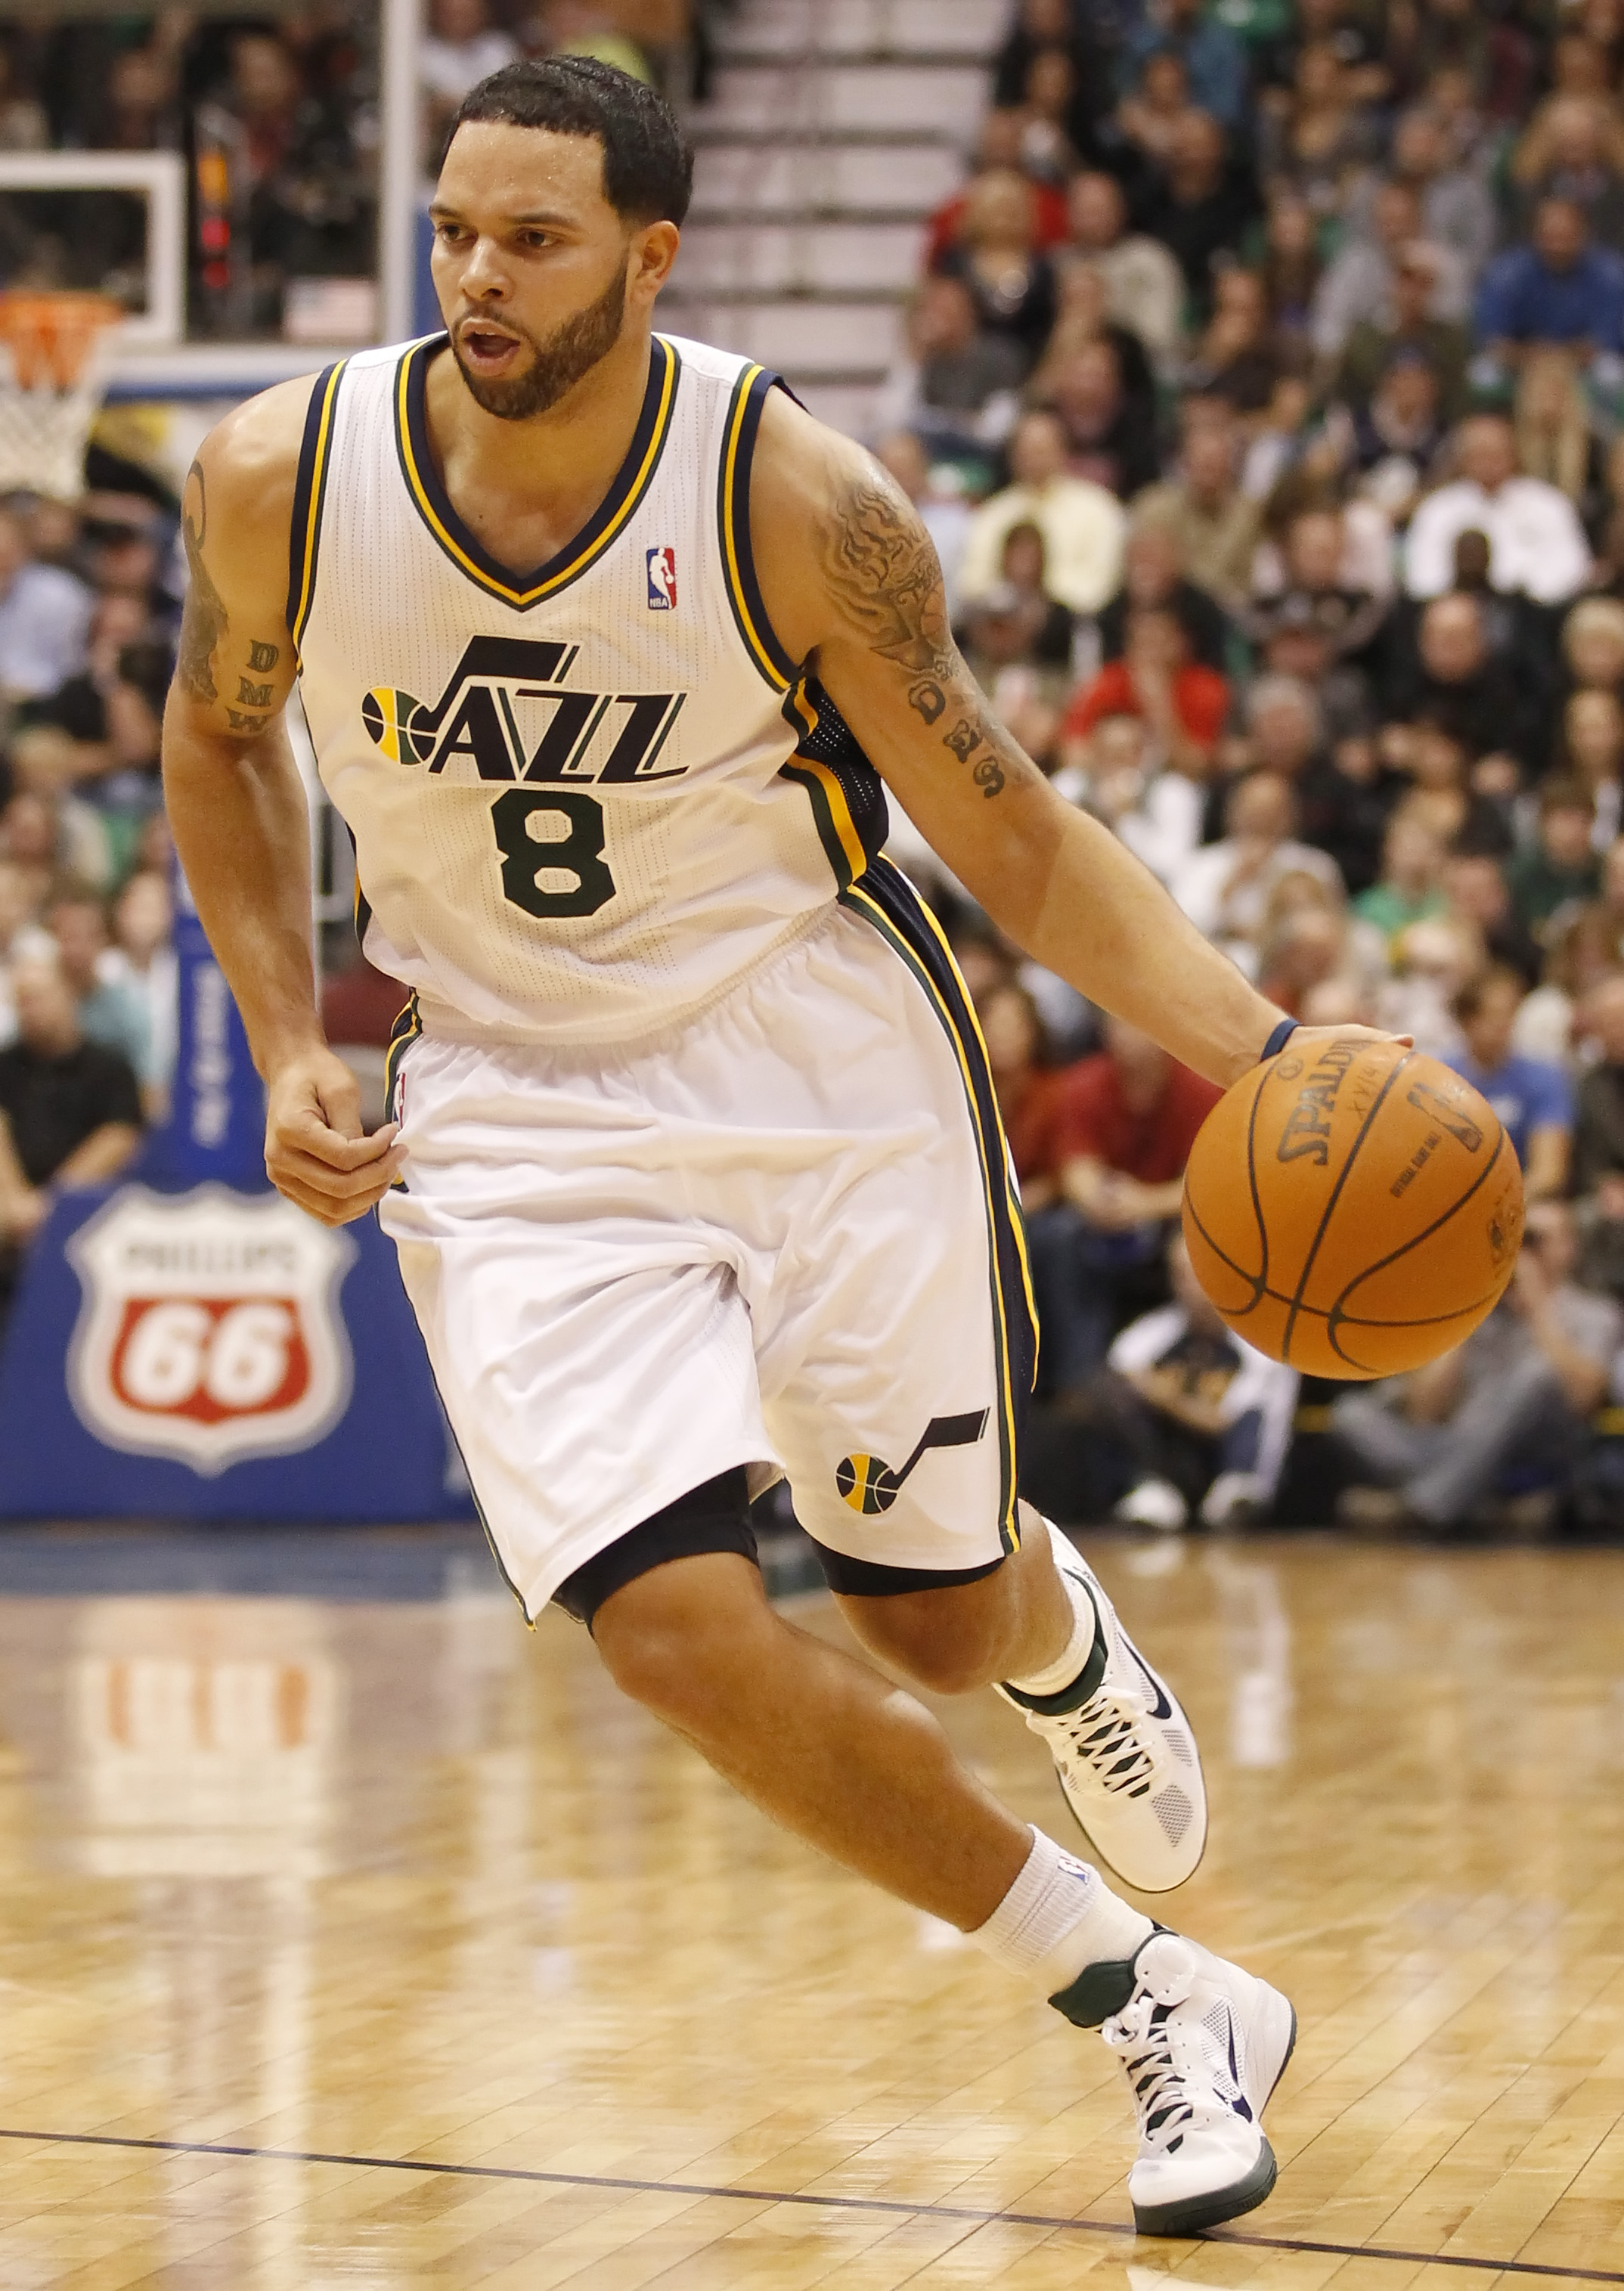 SALT LAKE CITY, UT - DECEMBER 8:  Deron Williams #8 of the Utah Jazz drives the ball down court during a game against the Miami Heat during the second half of an NBA game December 8, 2010 at Energy Solutions Arena in Salt Lake City, Utah. The Heat beat th